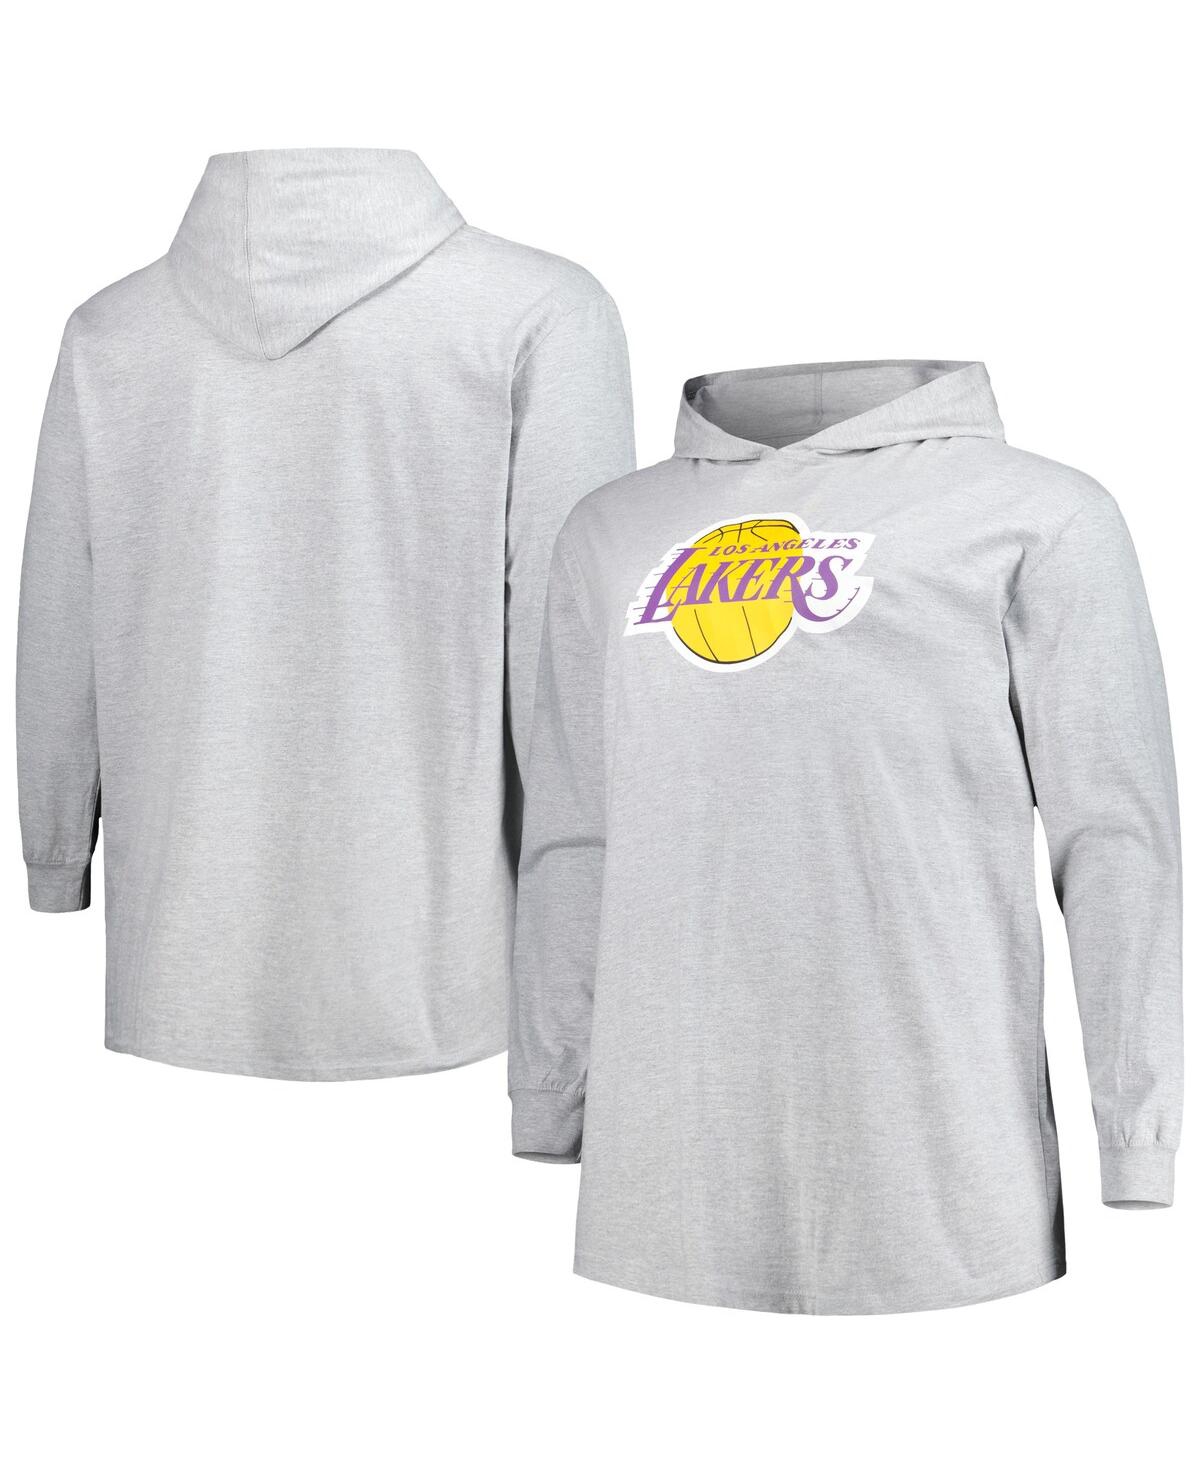 Men's Fanatics Heather Gray Los Angeles Lakers Big and Tall Pullover Hoodie - Heather Gray